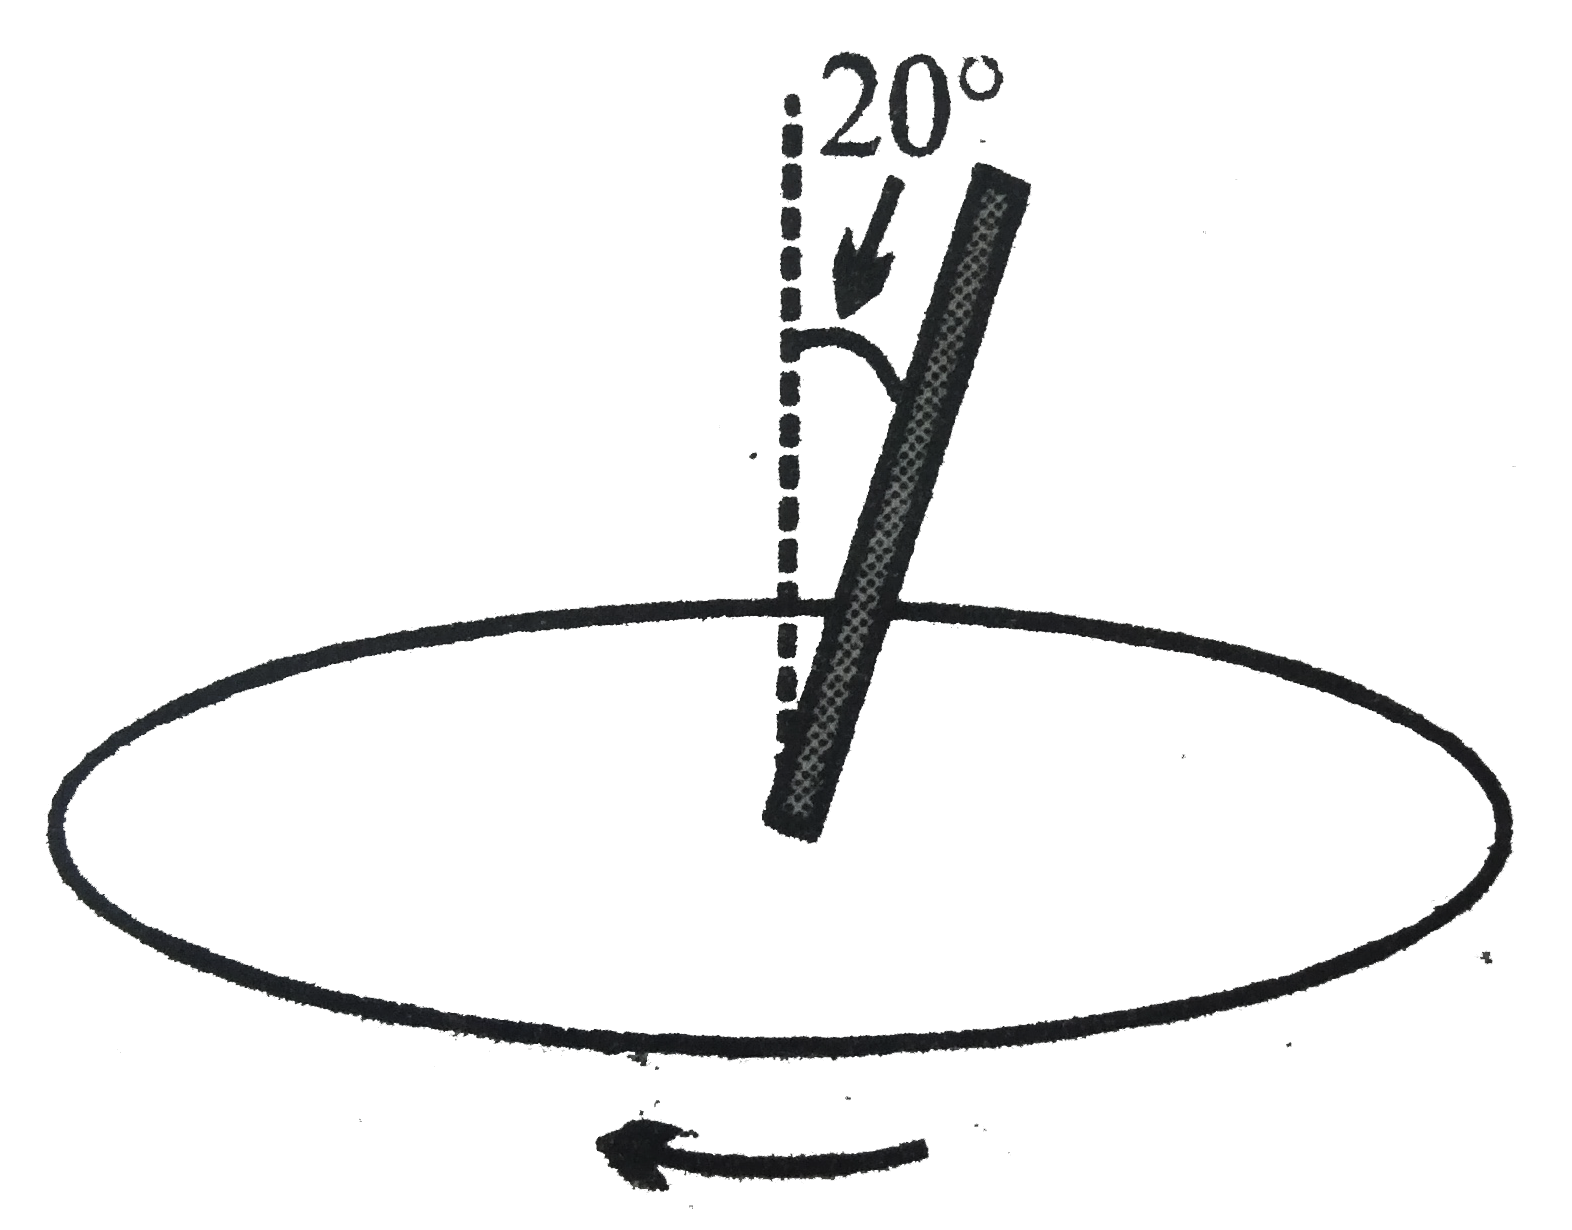 A uniform rod is fixed to a rotating turntable so that its lower end is on the axis of the turntable and it makes an angle of 20 % to the vertical. (The rod is thus rotating with uniform angular velocity about a vertical axis passing through one end.) If the turntable is rotating clockwise as seen from above.   .   What is the direction of the rod's angular momentum vector (calculated about its lower end) ?